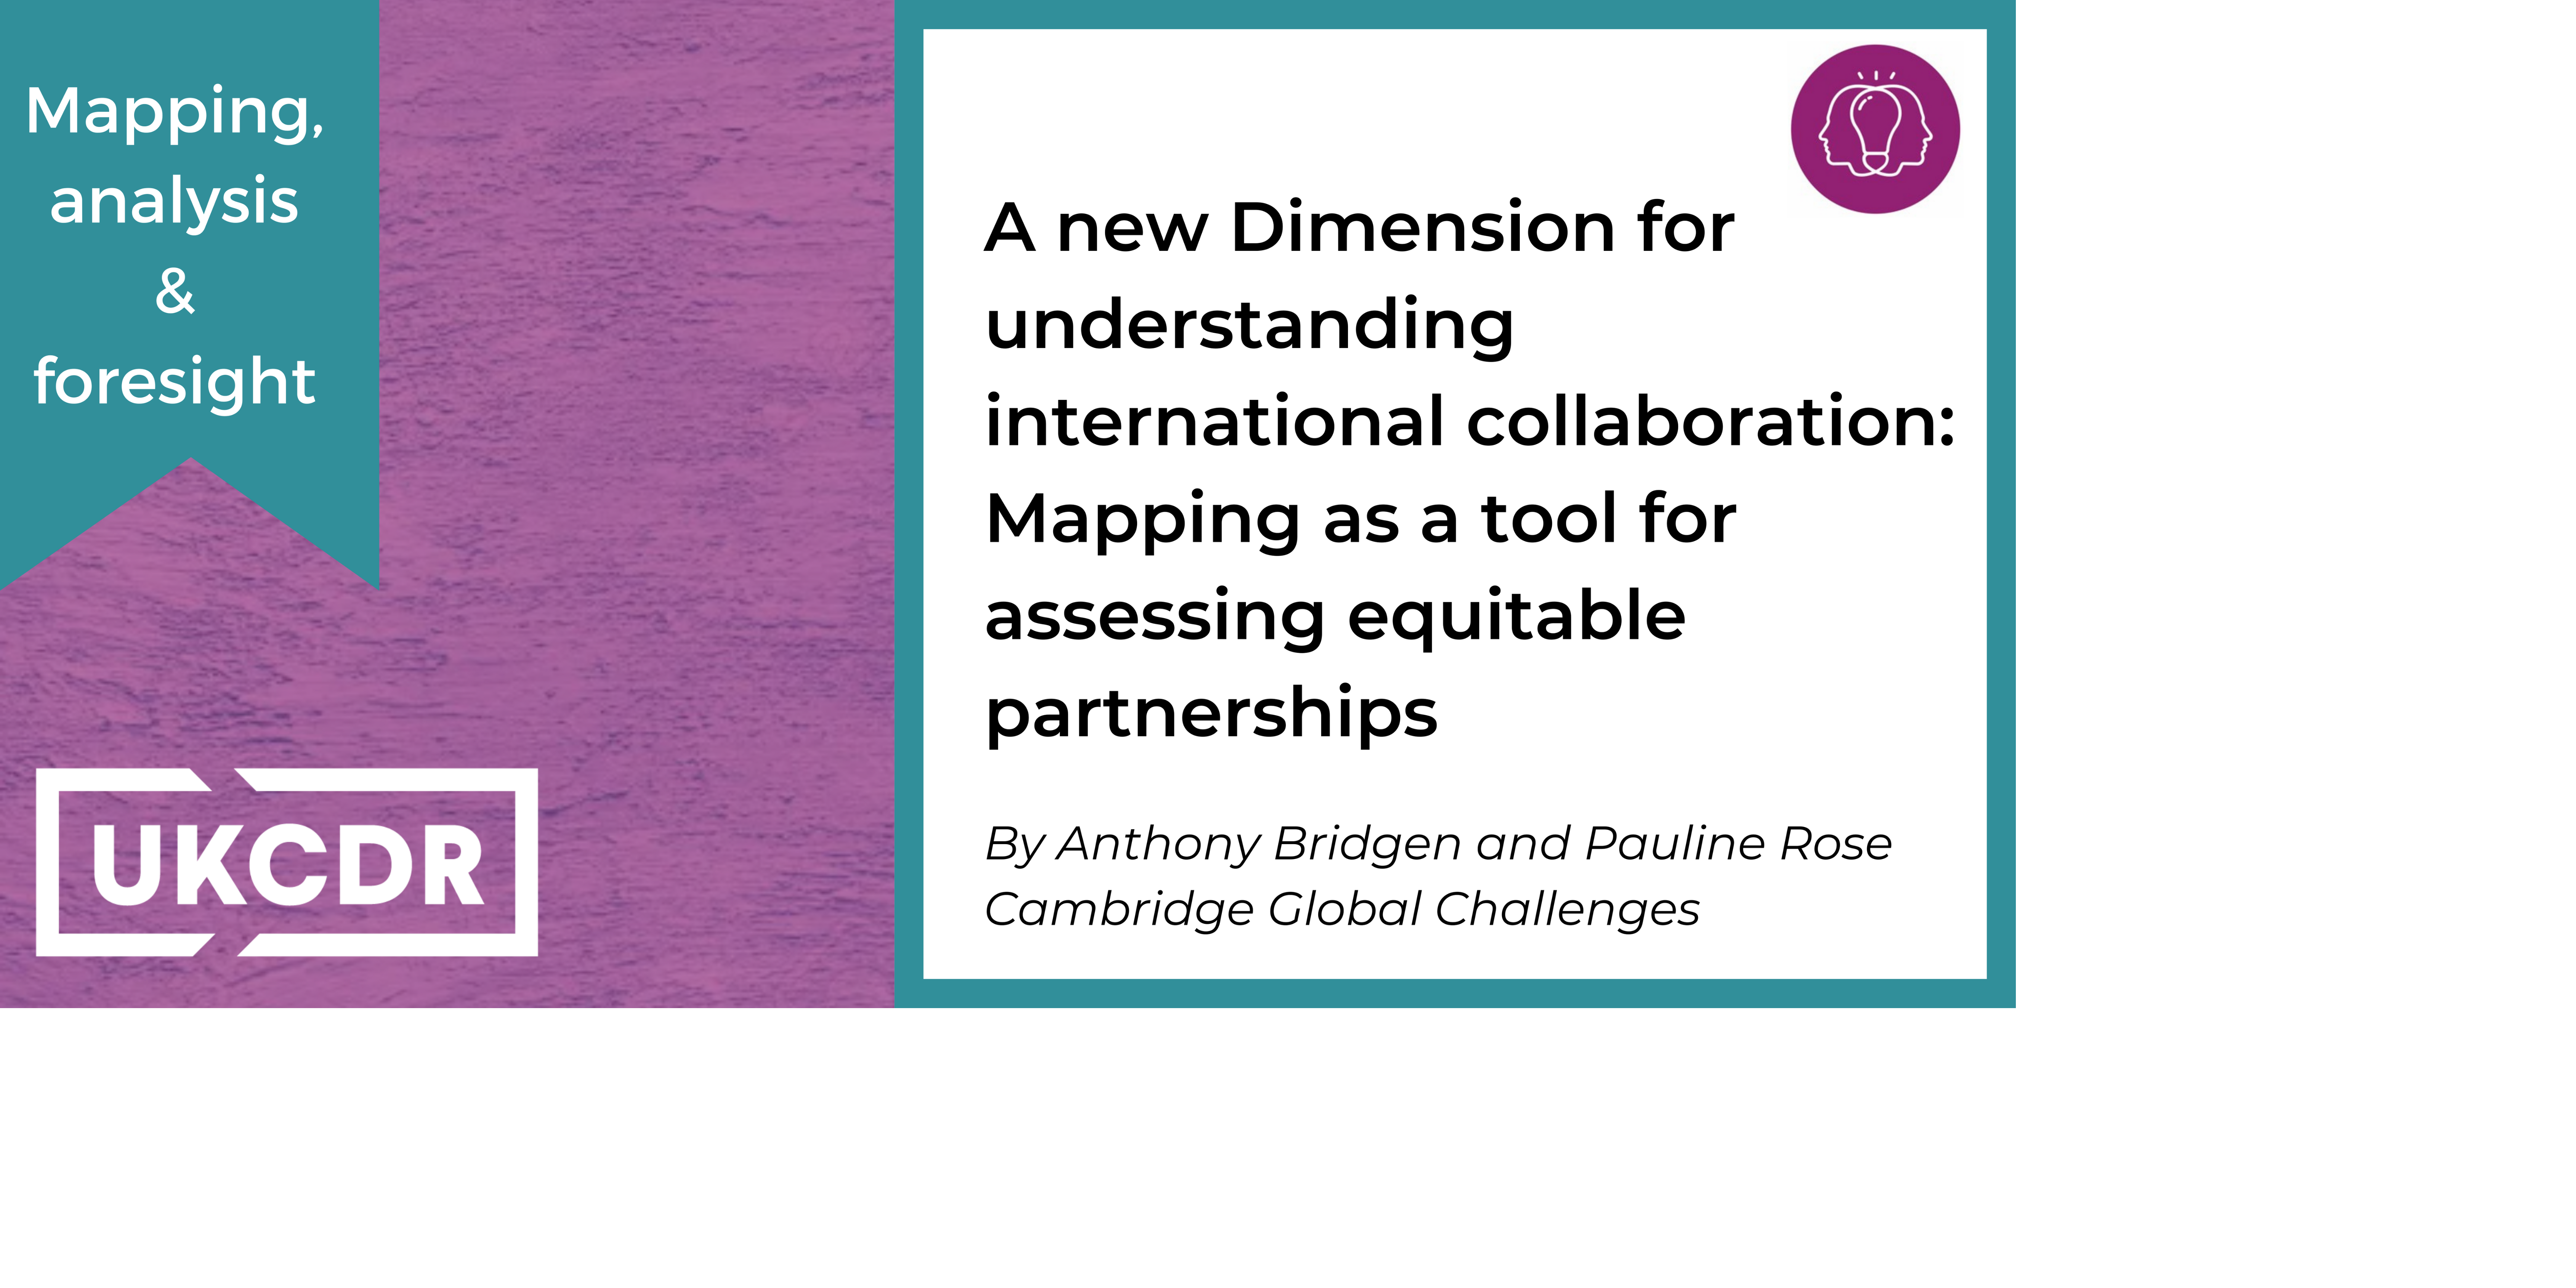 A new Dimension for understanding international collaboration: Mapping as a tool for assessing equitable partnerships